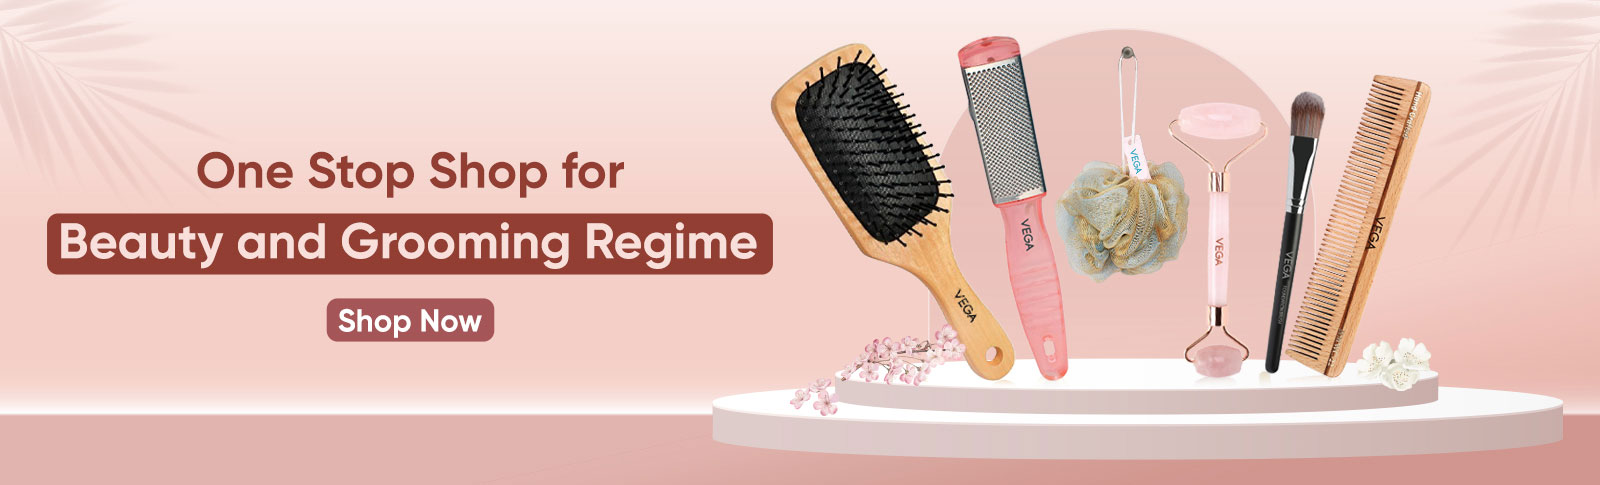 Beauty and Grooming Regime